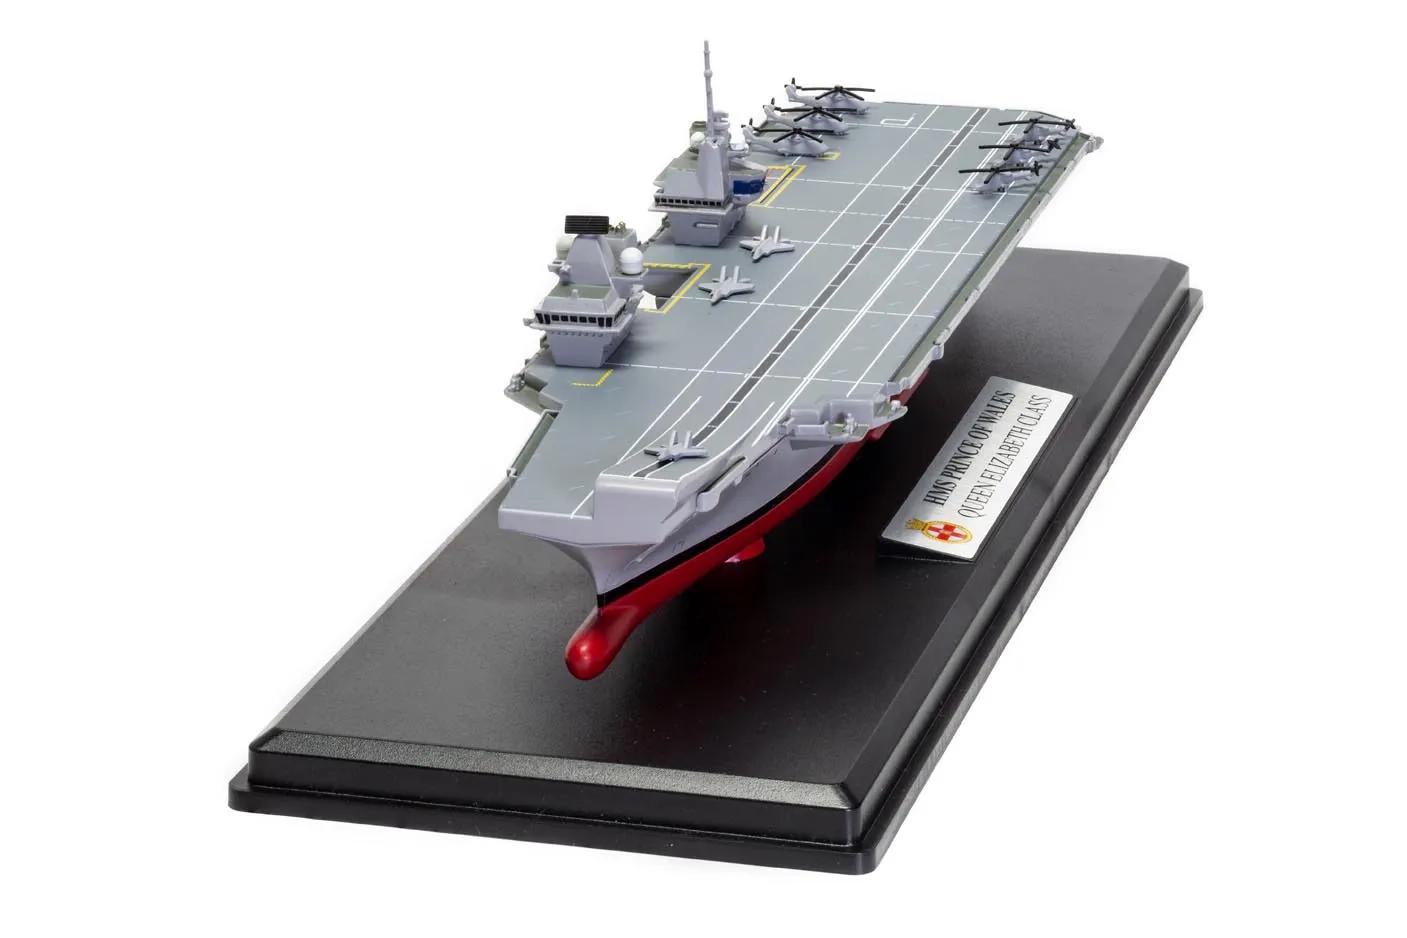 HMS Prince of Wales (R09), Queen Elizabeth-class aircraft carrier